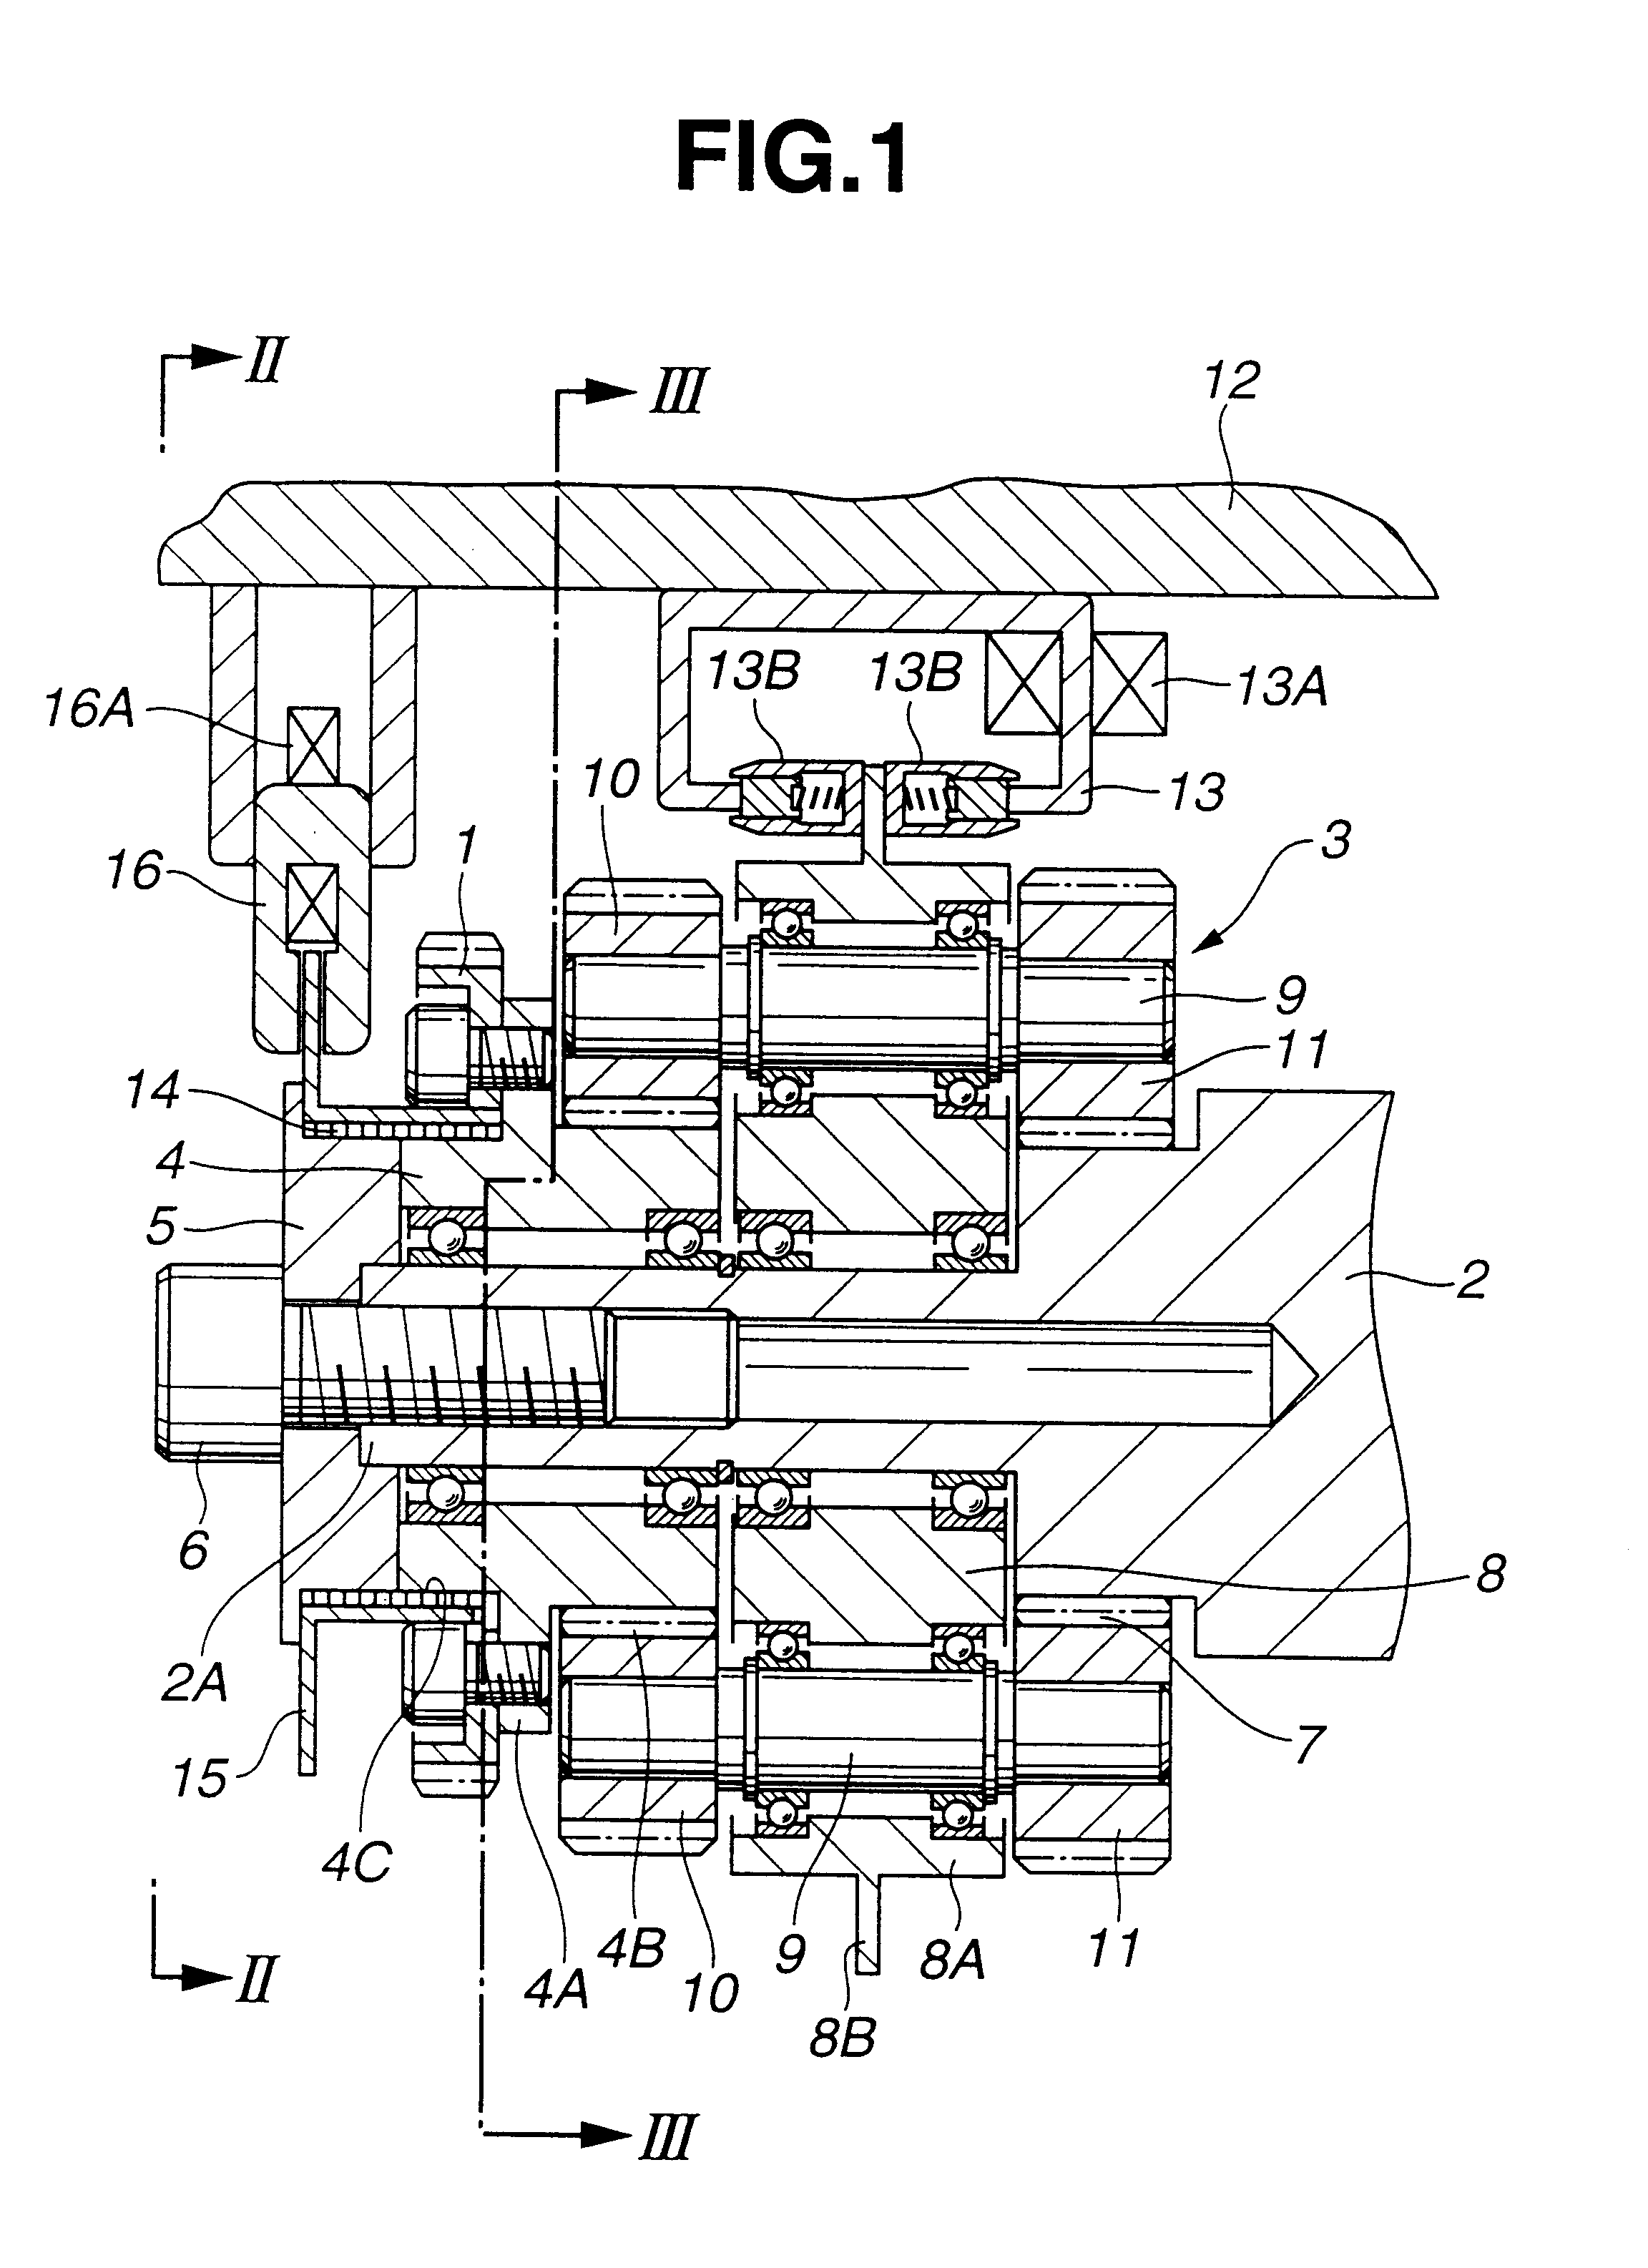 Valve timing control system for internal combustion engine